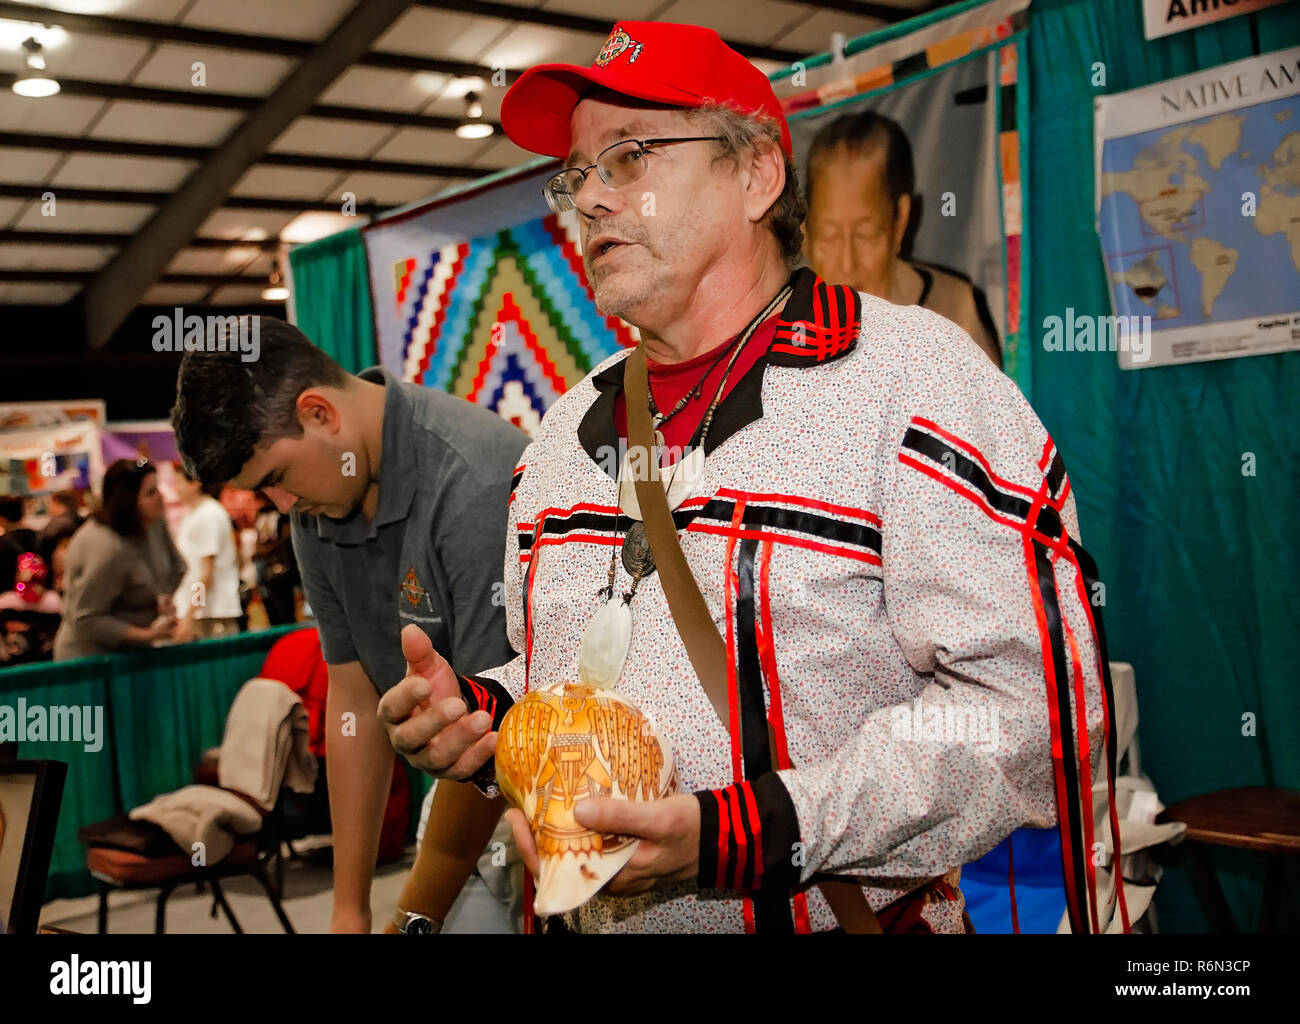 Amember of the Poarch Creek Indians tribe, discusses Native American shell carving at the Mobile International Festival in Mobile, Alabama. Stock Photo